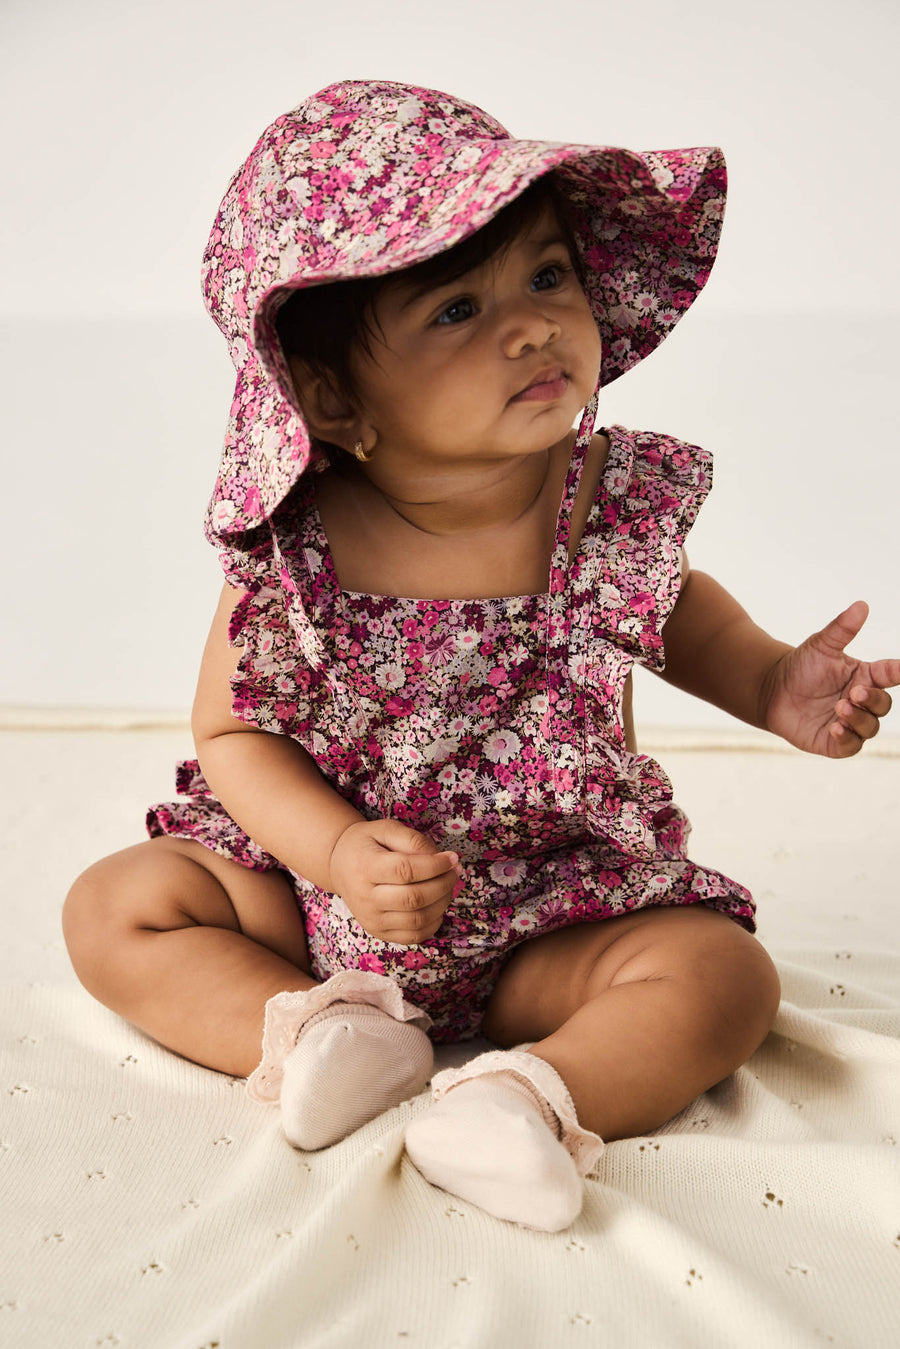 Organic Cotton Madeline Playsuit - Garden Print Childrens Playsuit from Jamie Kay NZ